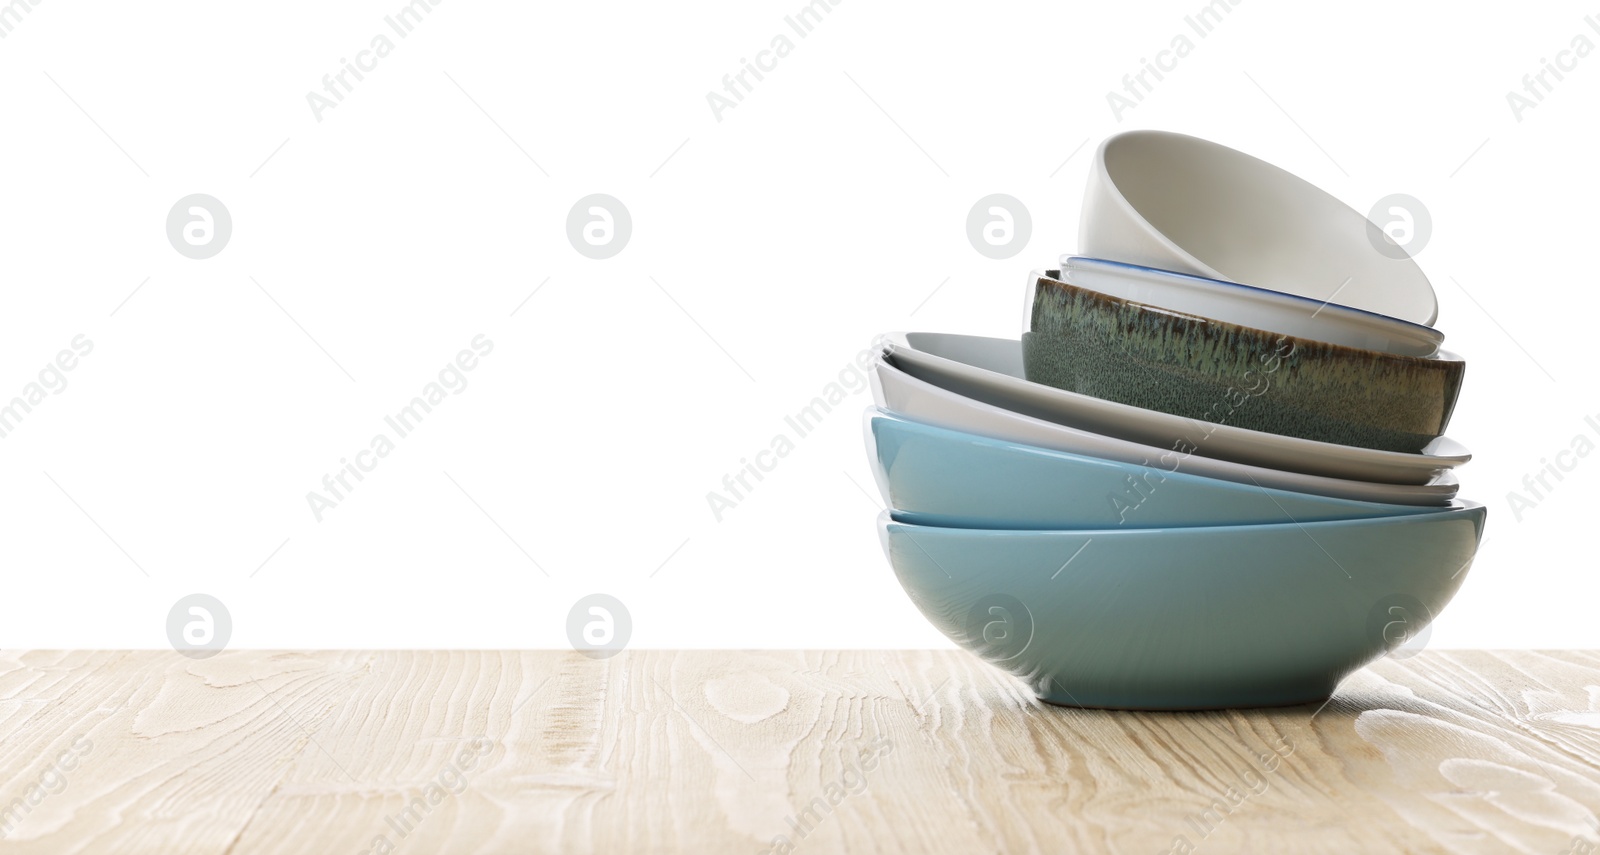 Photo of Set of clean color bowls on wooden table against white background